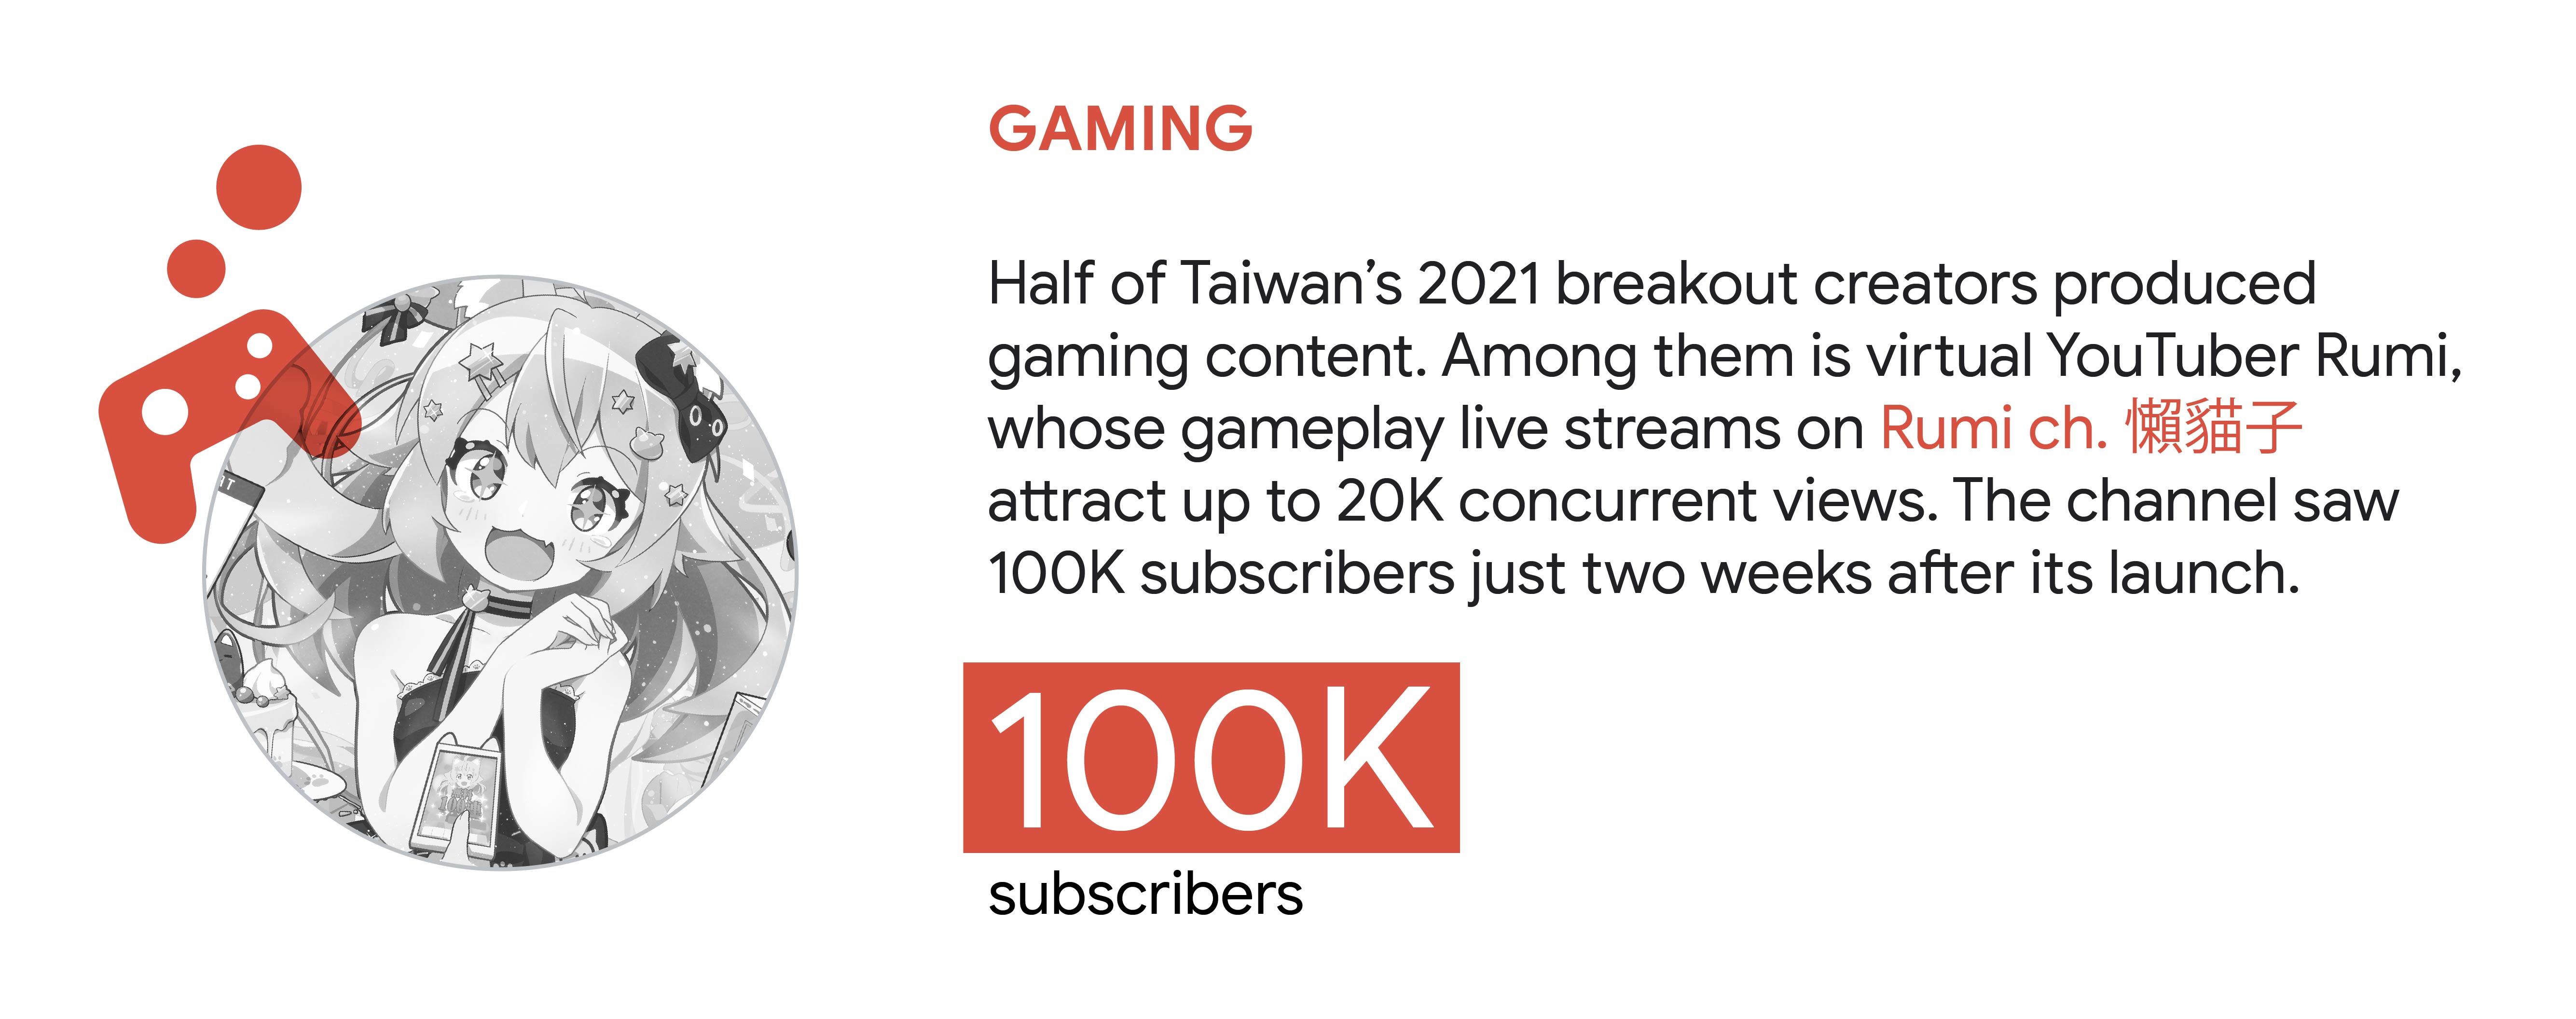 YouTube trend 3: Gaming. Half of Taiwan’s 2021 breakout creators produced gaming content. Virtual YouTuber Rumi attracts up to 20K concurrent views on her gameplay live streams on Rumi ch. 懶貓子, which saw 100K subscribers two weeks after launch.